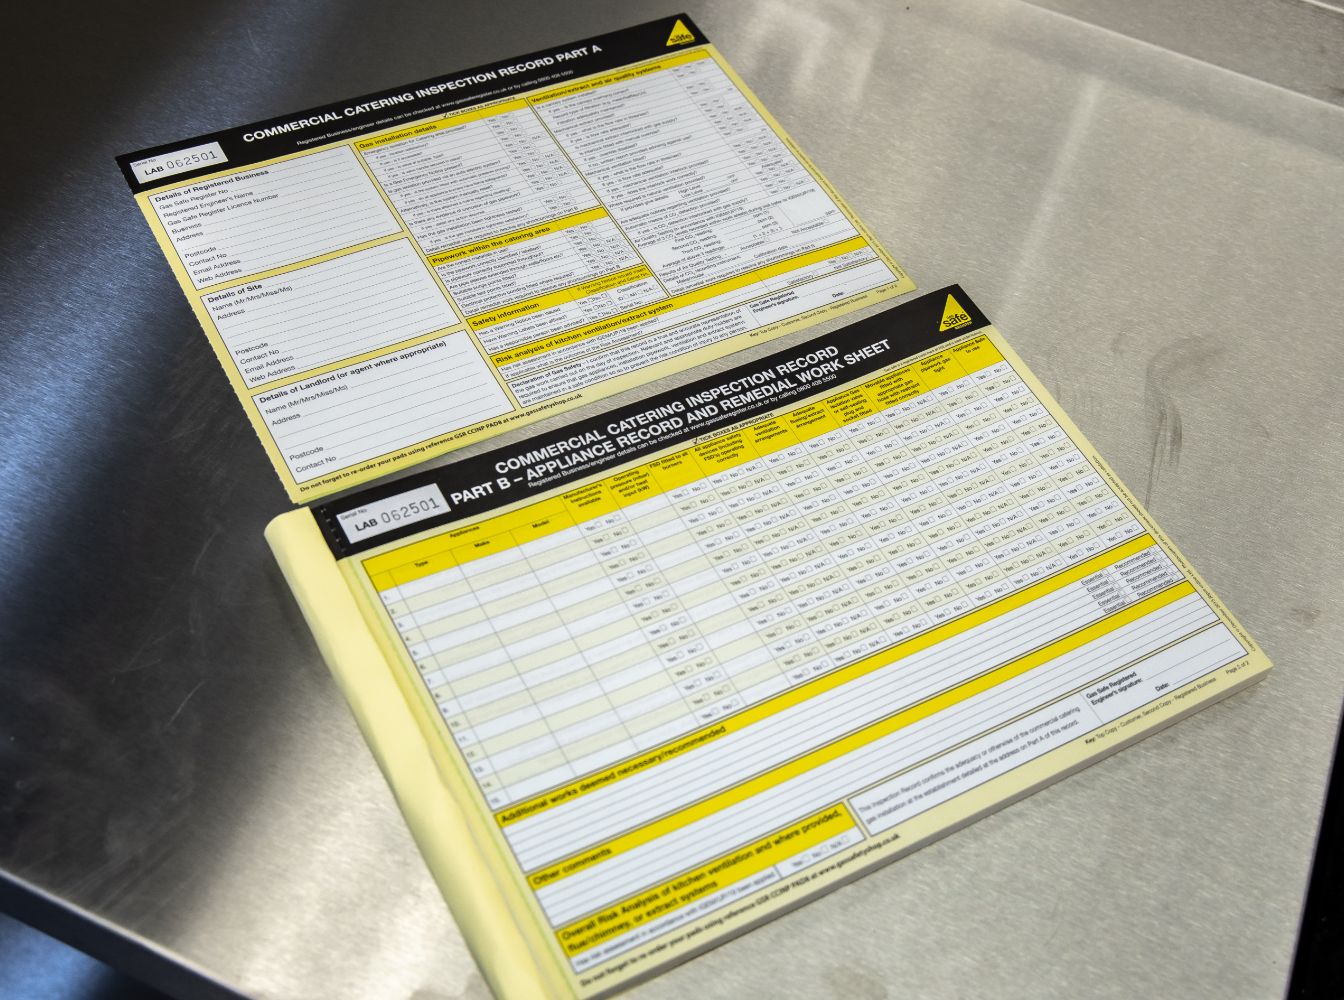 a recod sheet to record engineer visits to make sure businesses are compliant with commercial kitchen gas regulations